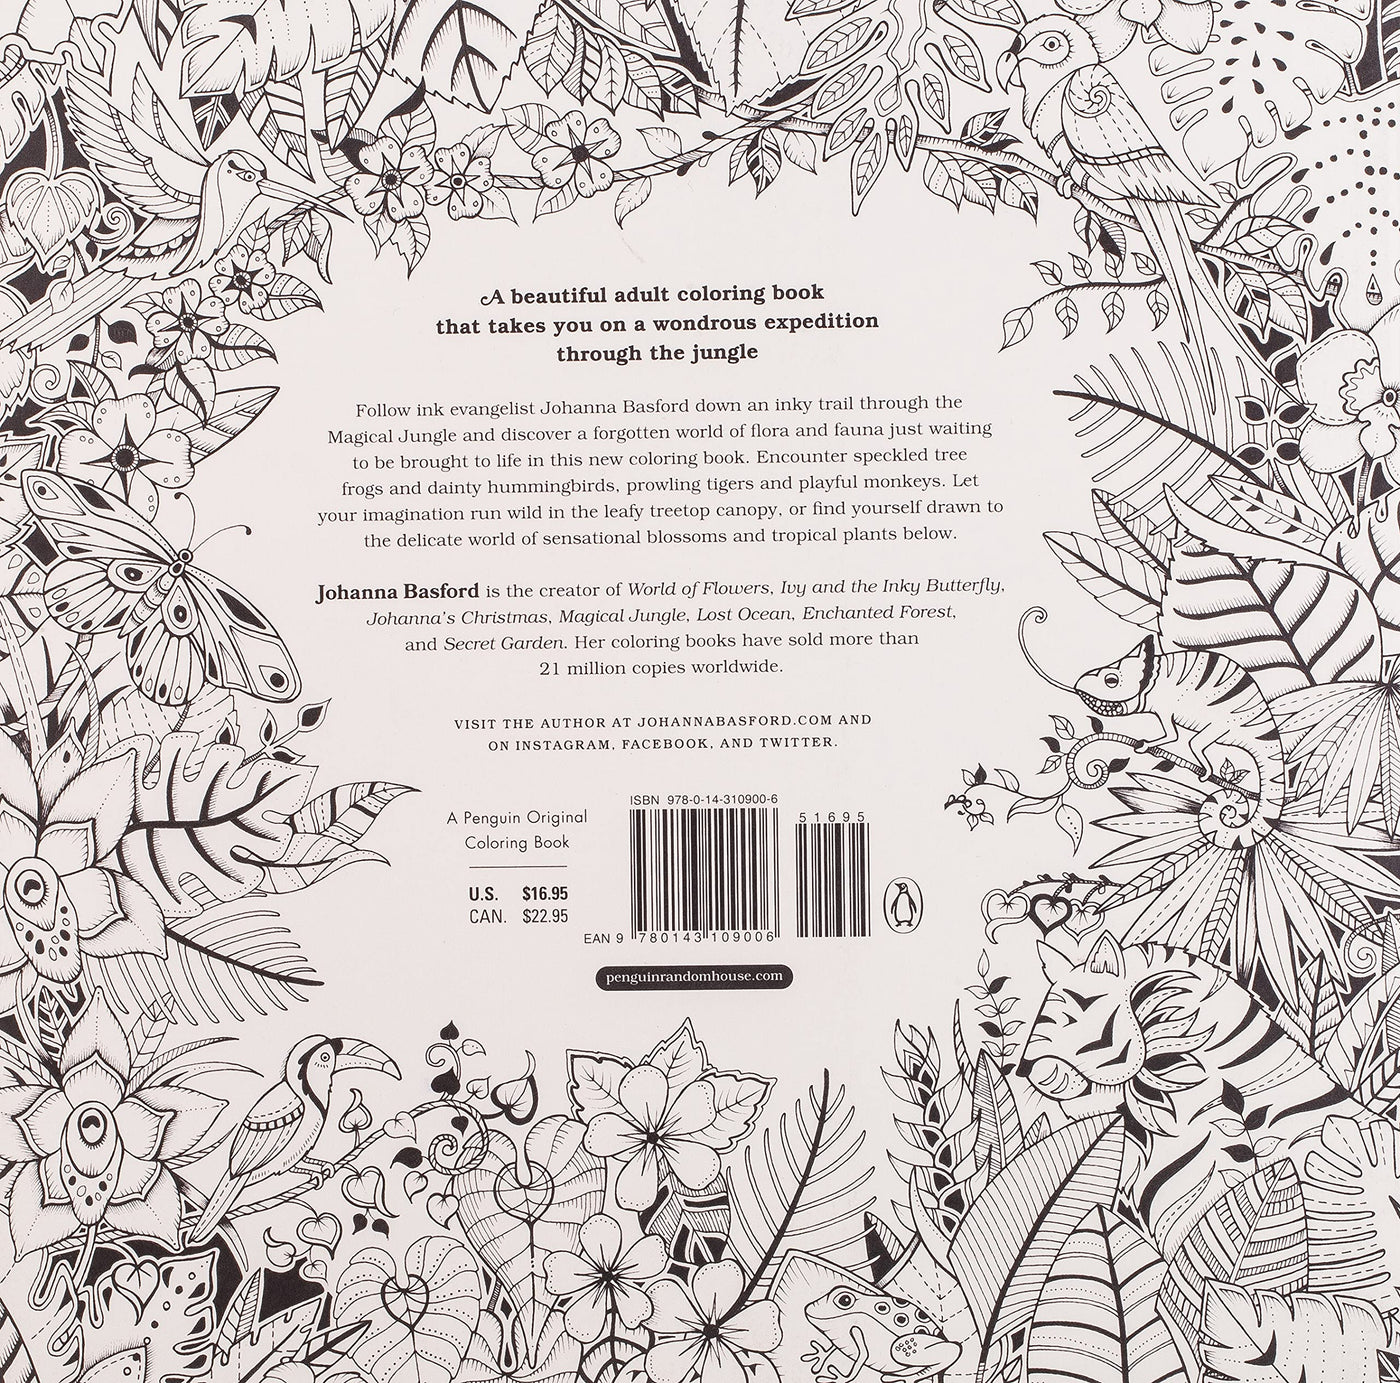 Life Of The Wild: A Whimsical Adult Coloring Book: Stress Relieving Animal  Designs a book by Adult Coloring Books, Coloring Books for Adults  Relaxation, and Adult Colouring Books